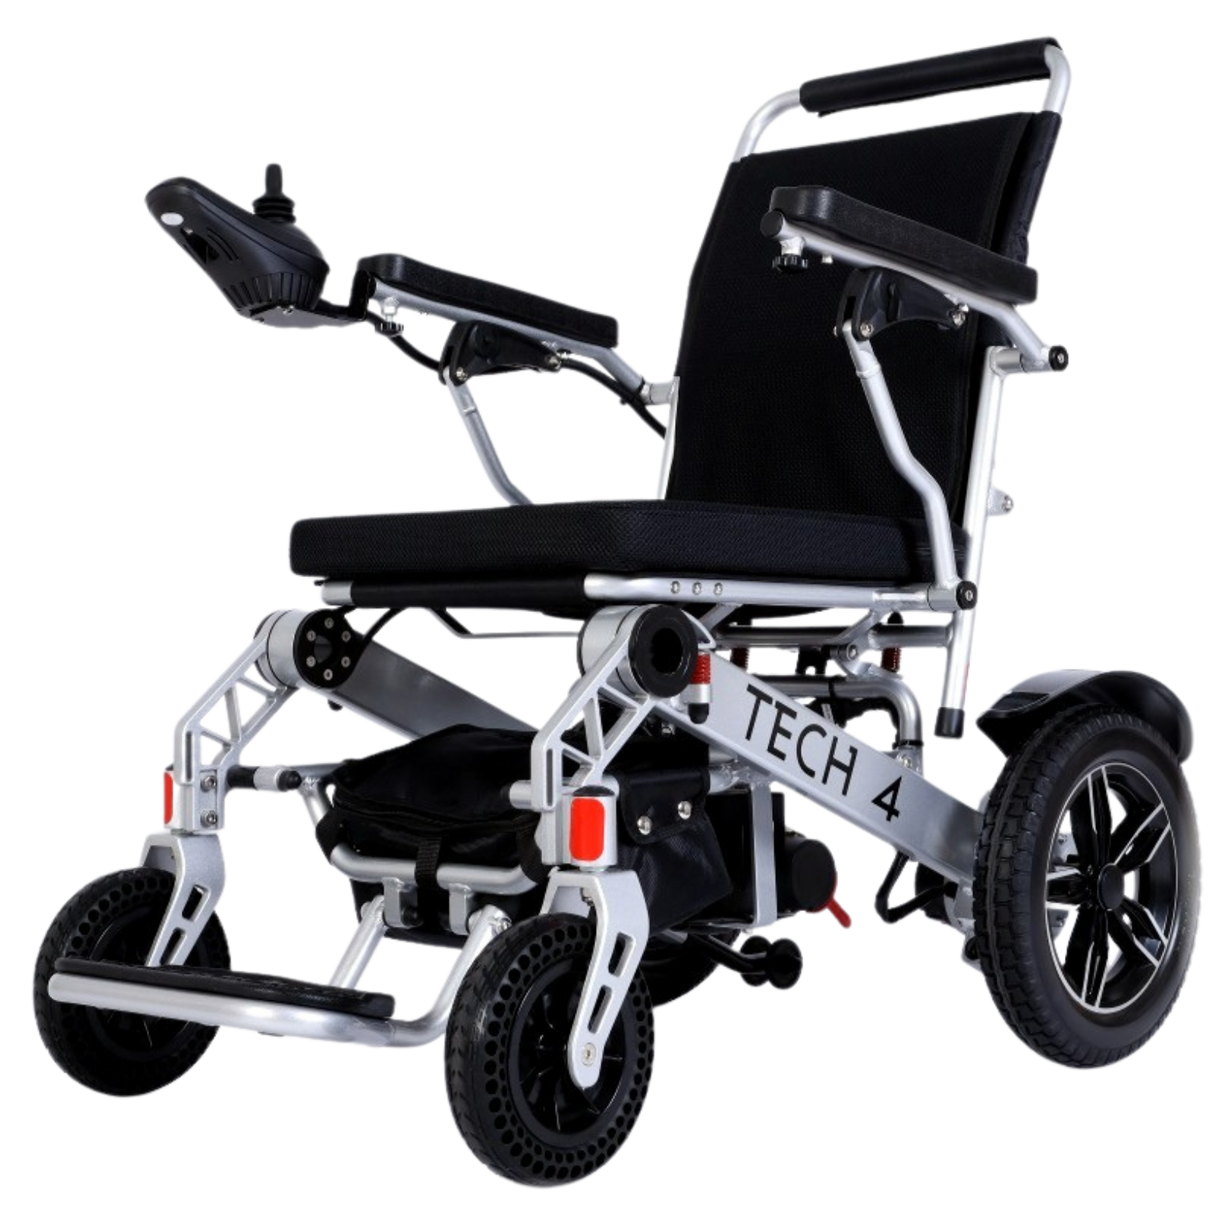 Tech 4 Lightweight Remote-Controlled Folding Electric Wheelchair